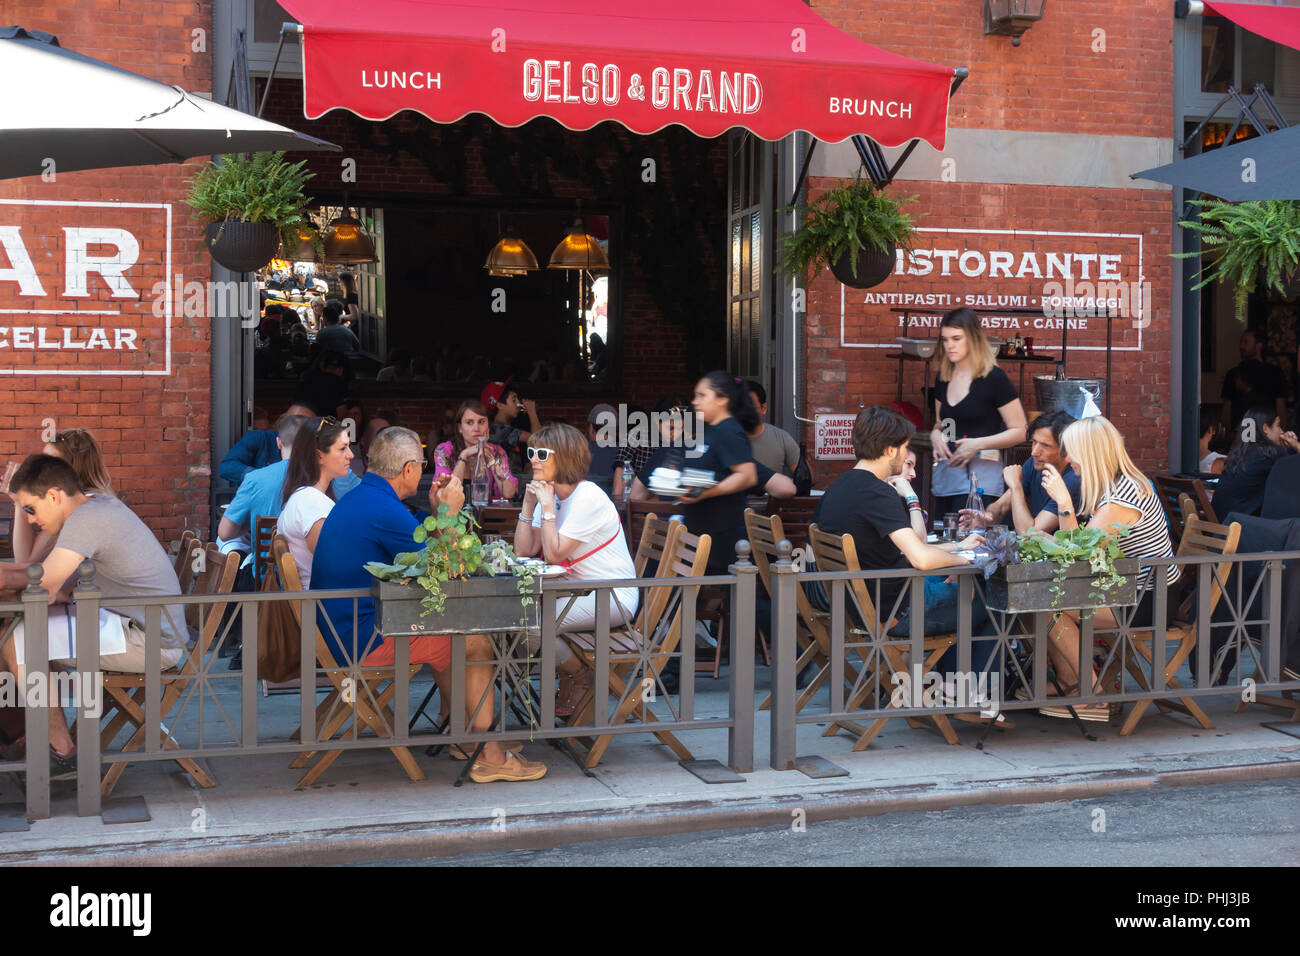 Alfresco dining at Gelso & Grand in Mulberry Street in Little Italy, New York City Stock Photo